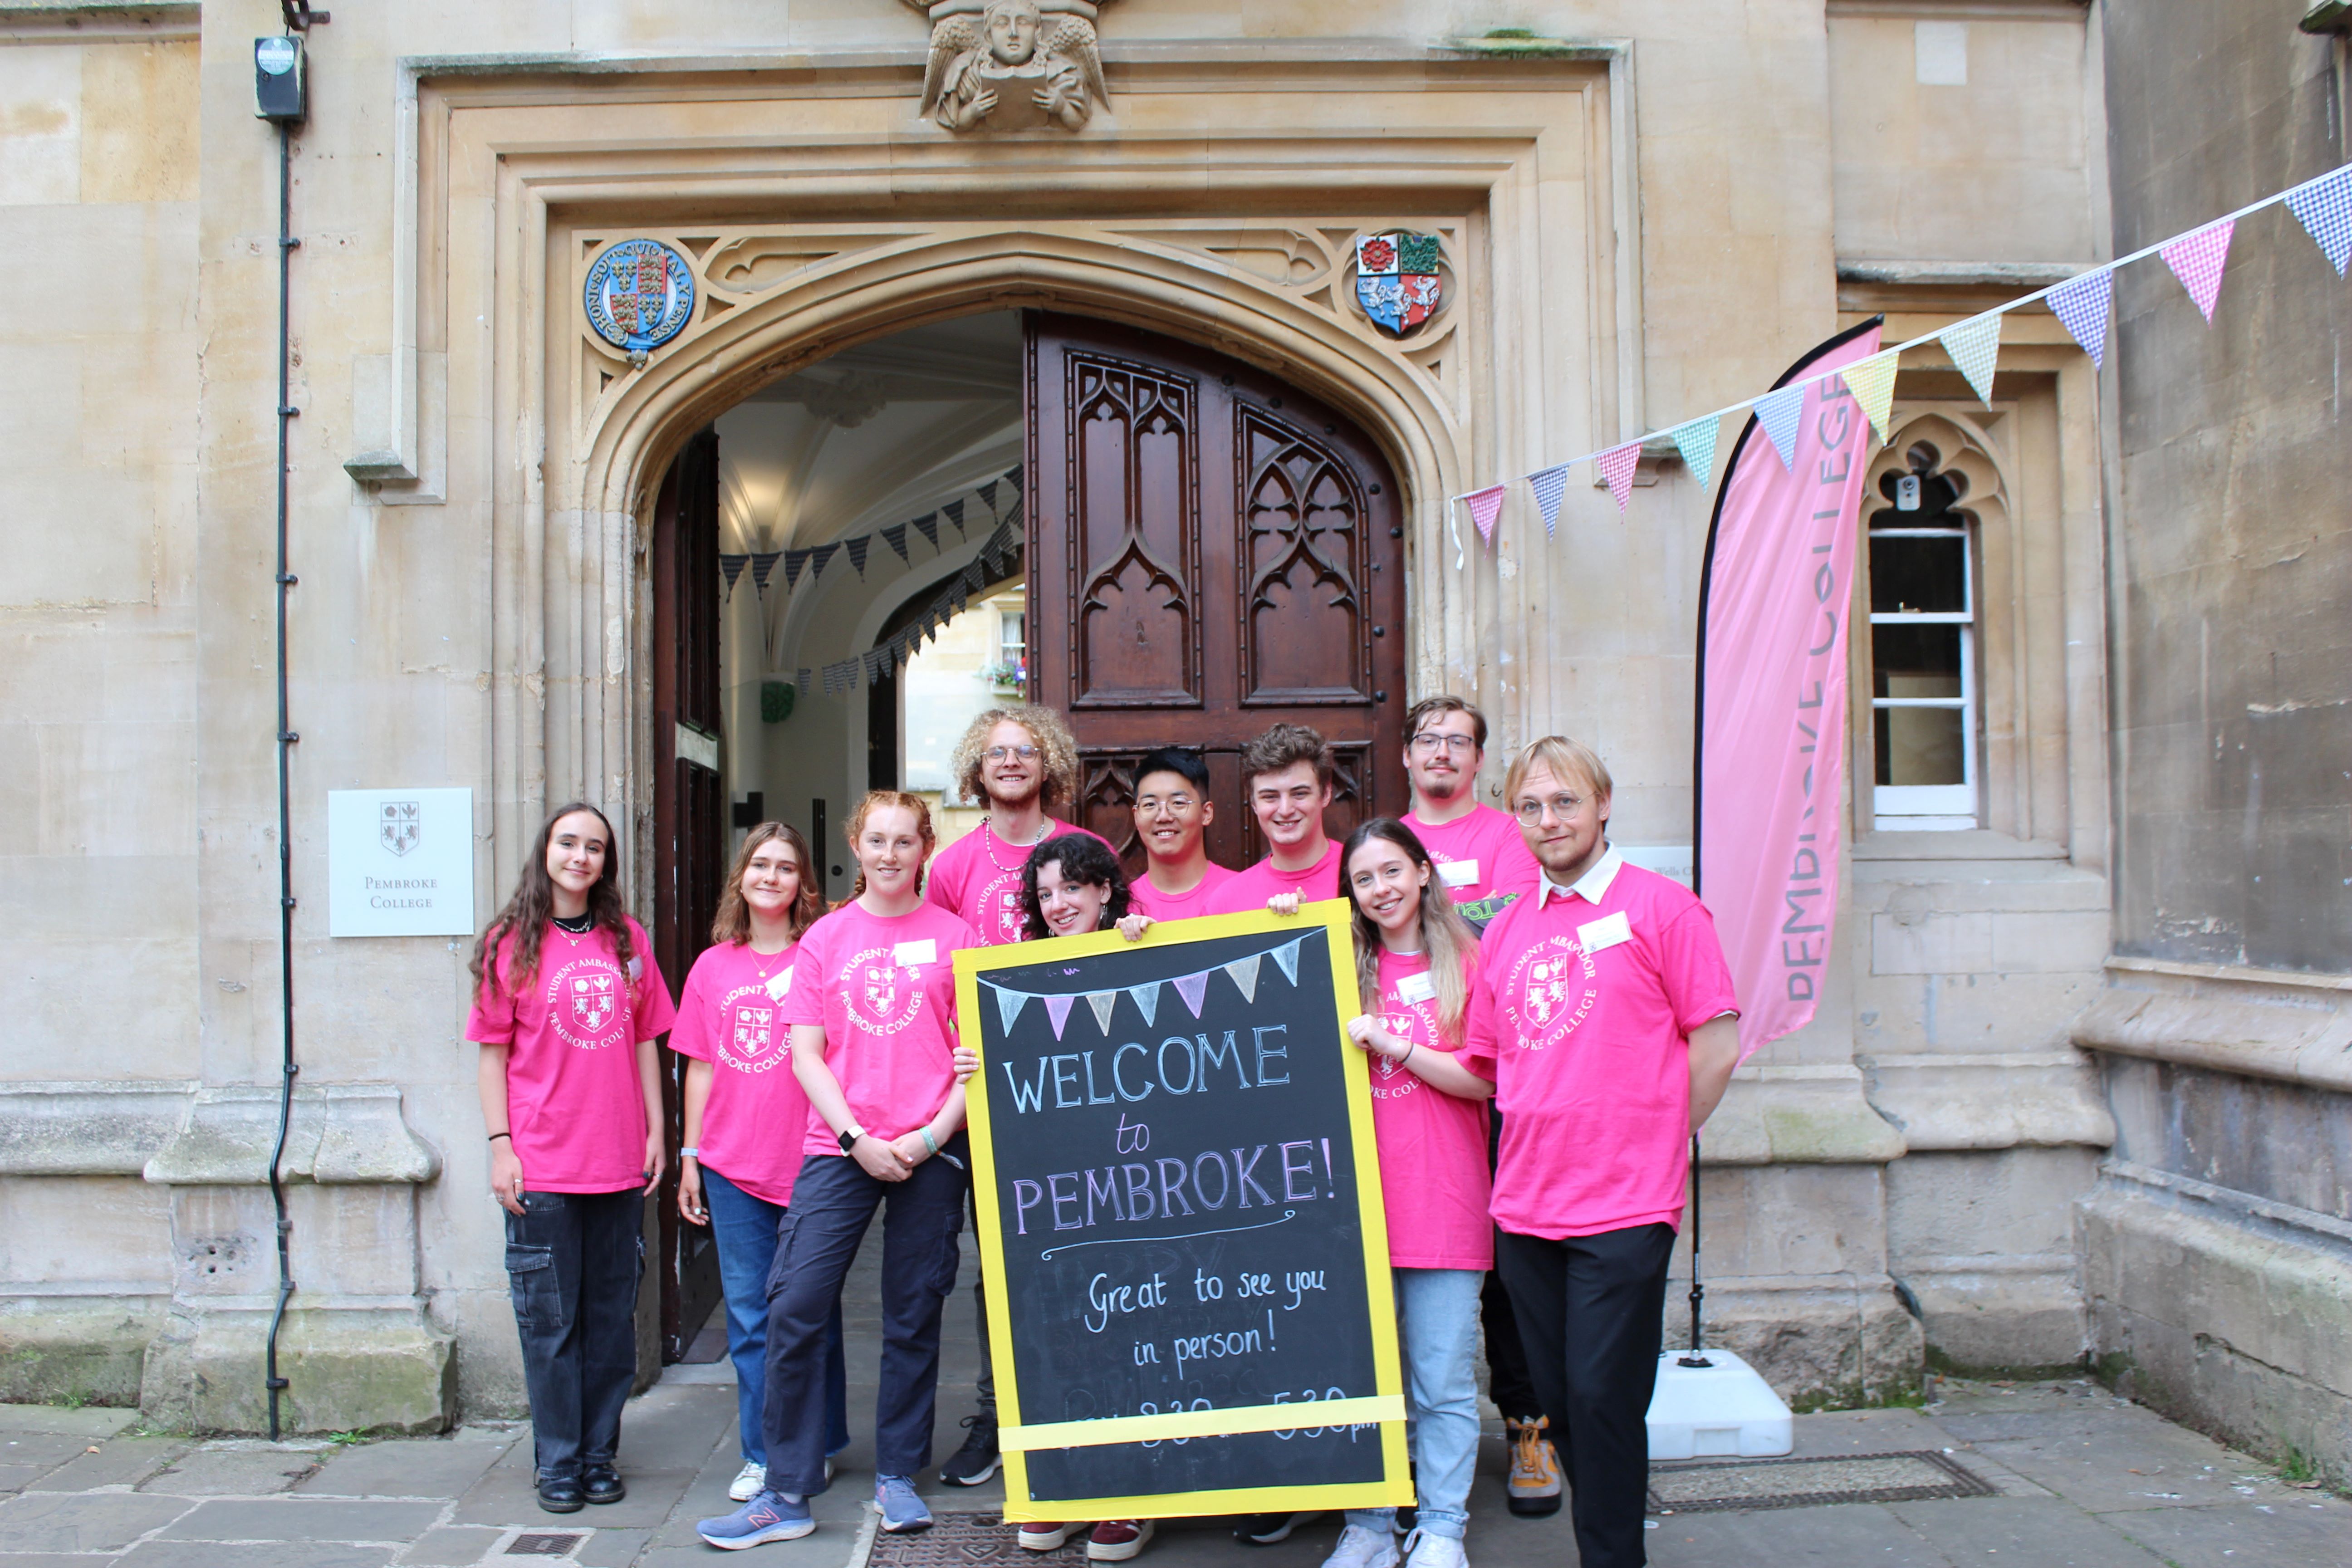 Group of student ambassadors standing outside Pembroke College in pink t-shirts. They are holding a sign that says "Welcome to Pembroke, Great to see you in person!" 